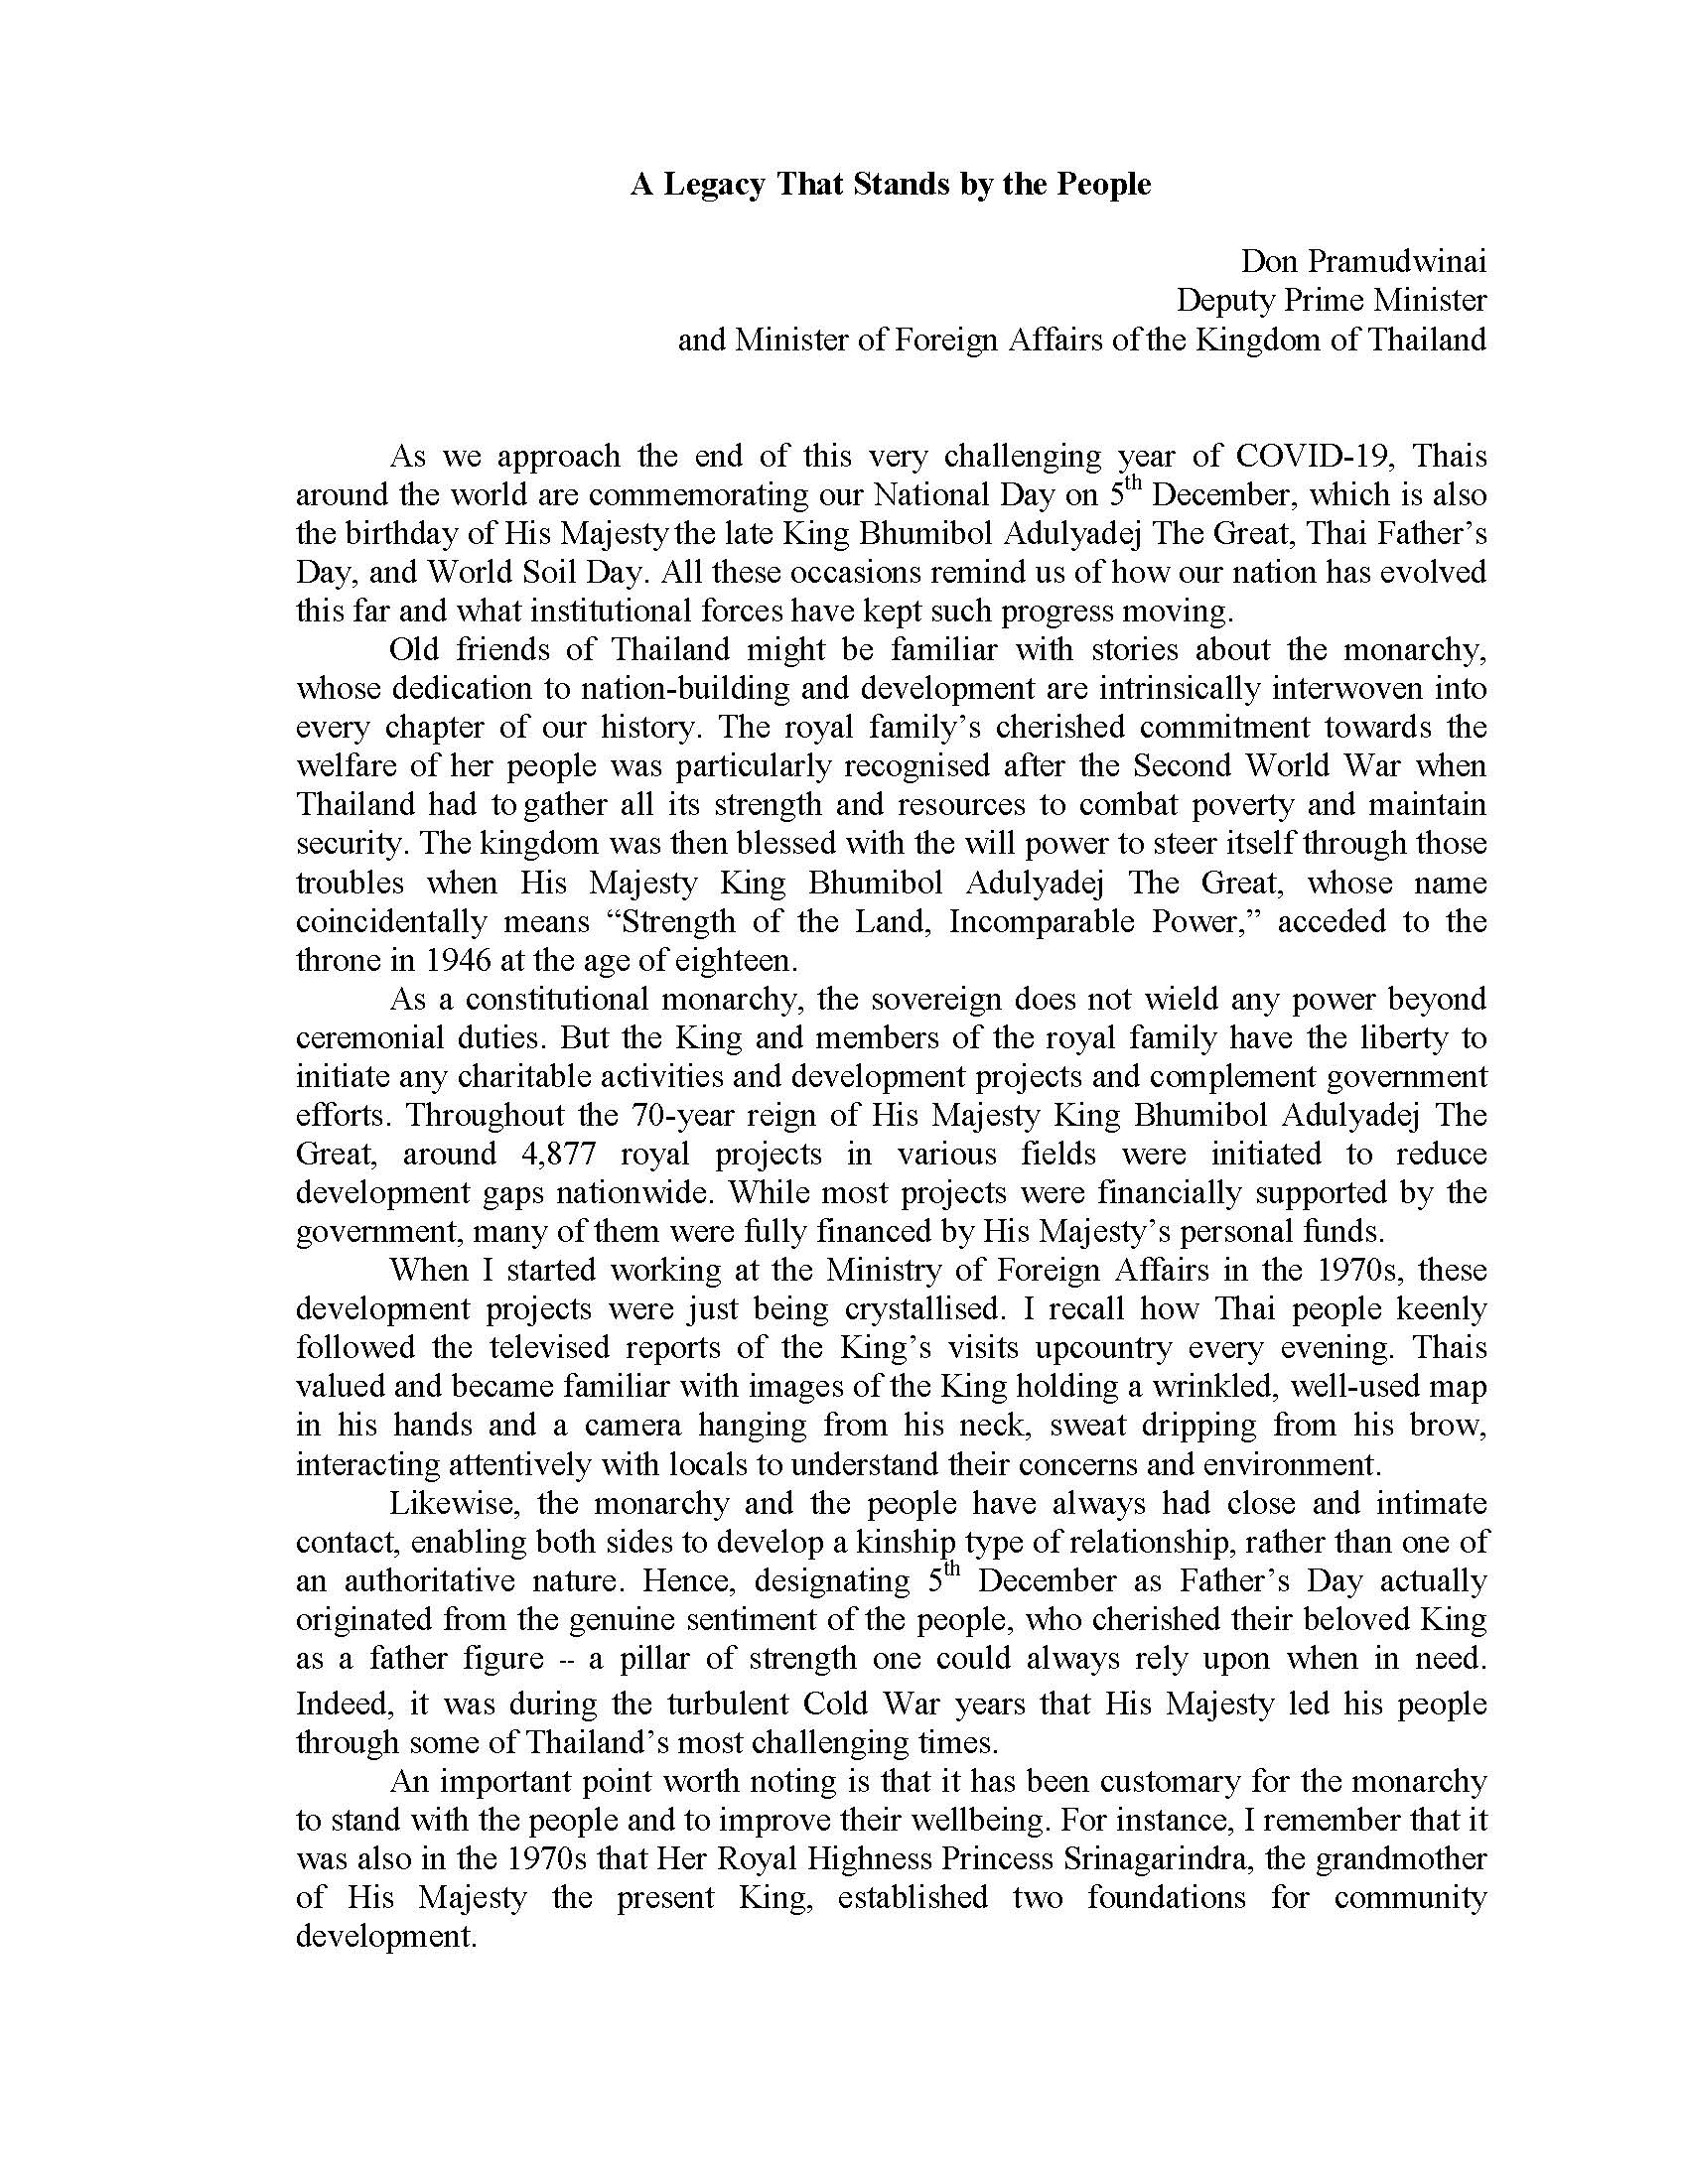 03DEC20_Article_for_Thai_National_Day_2563_FM_revised_Page_1